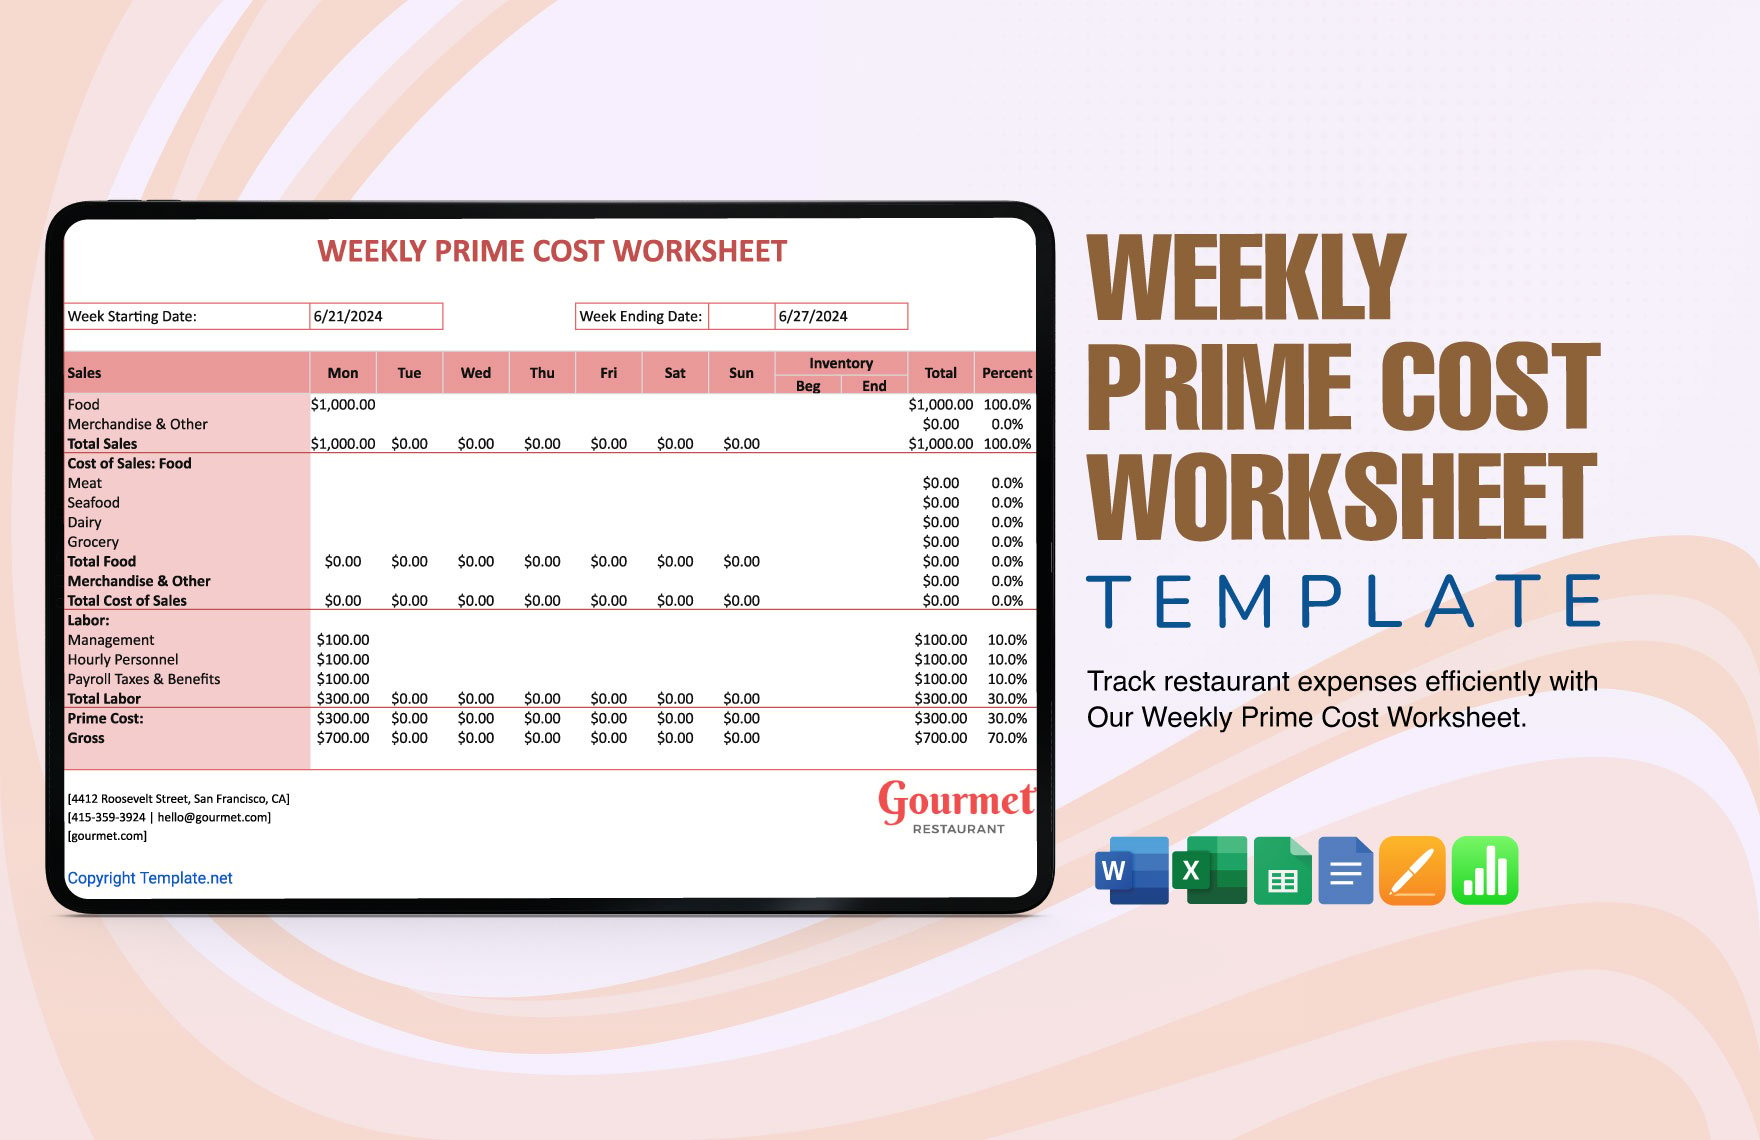 Weekly Prime Cost Worksheet Template in Word, Google Docs, Excel, Google Sheets, Apple Pages, Apple Numbers